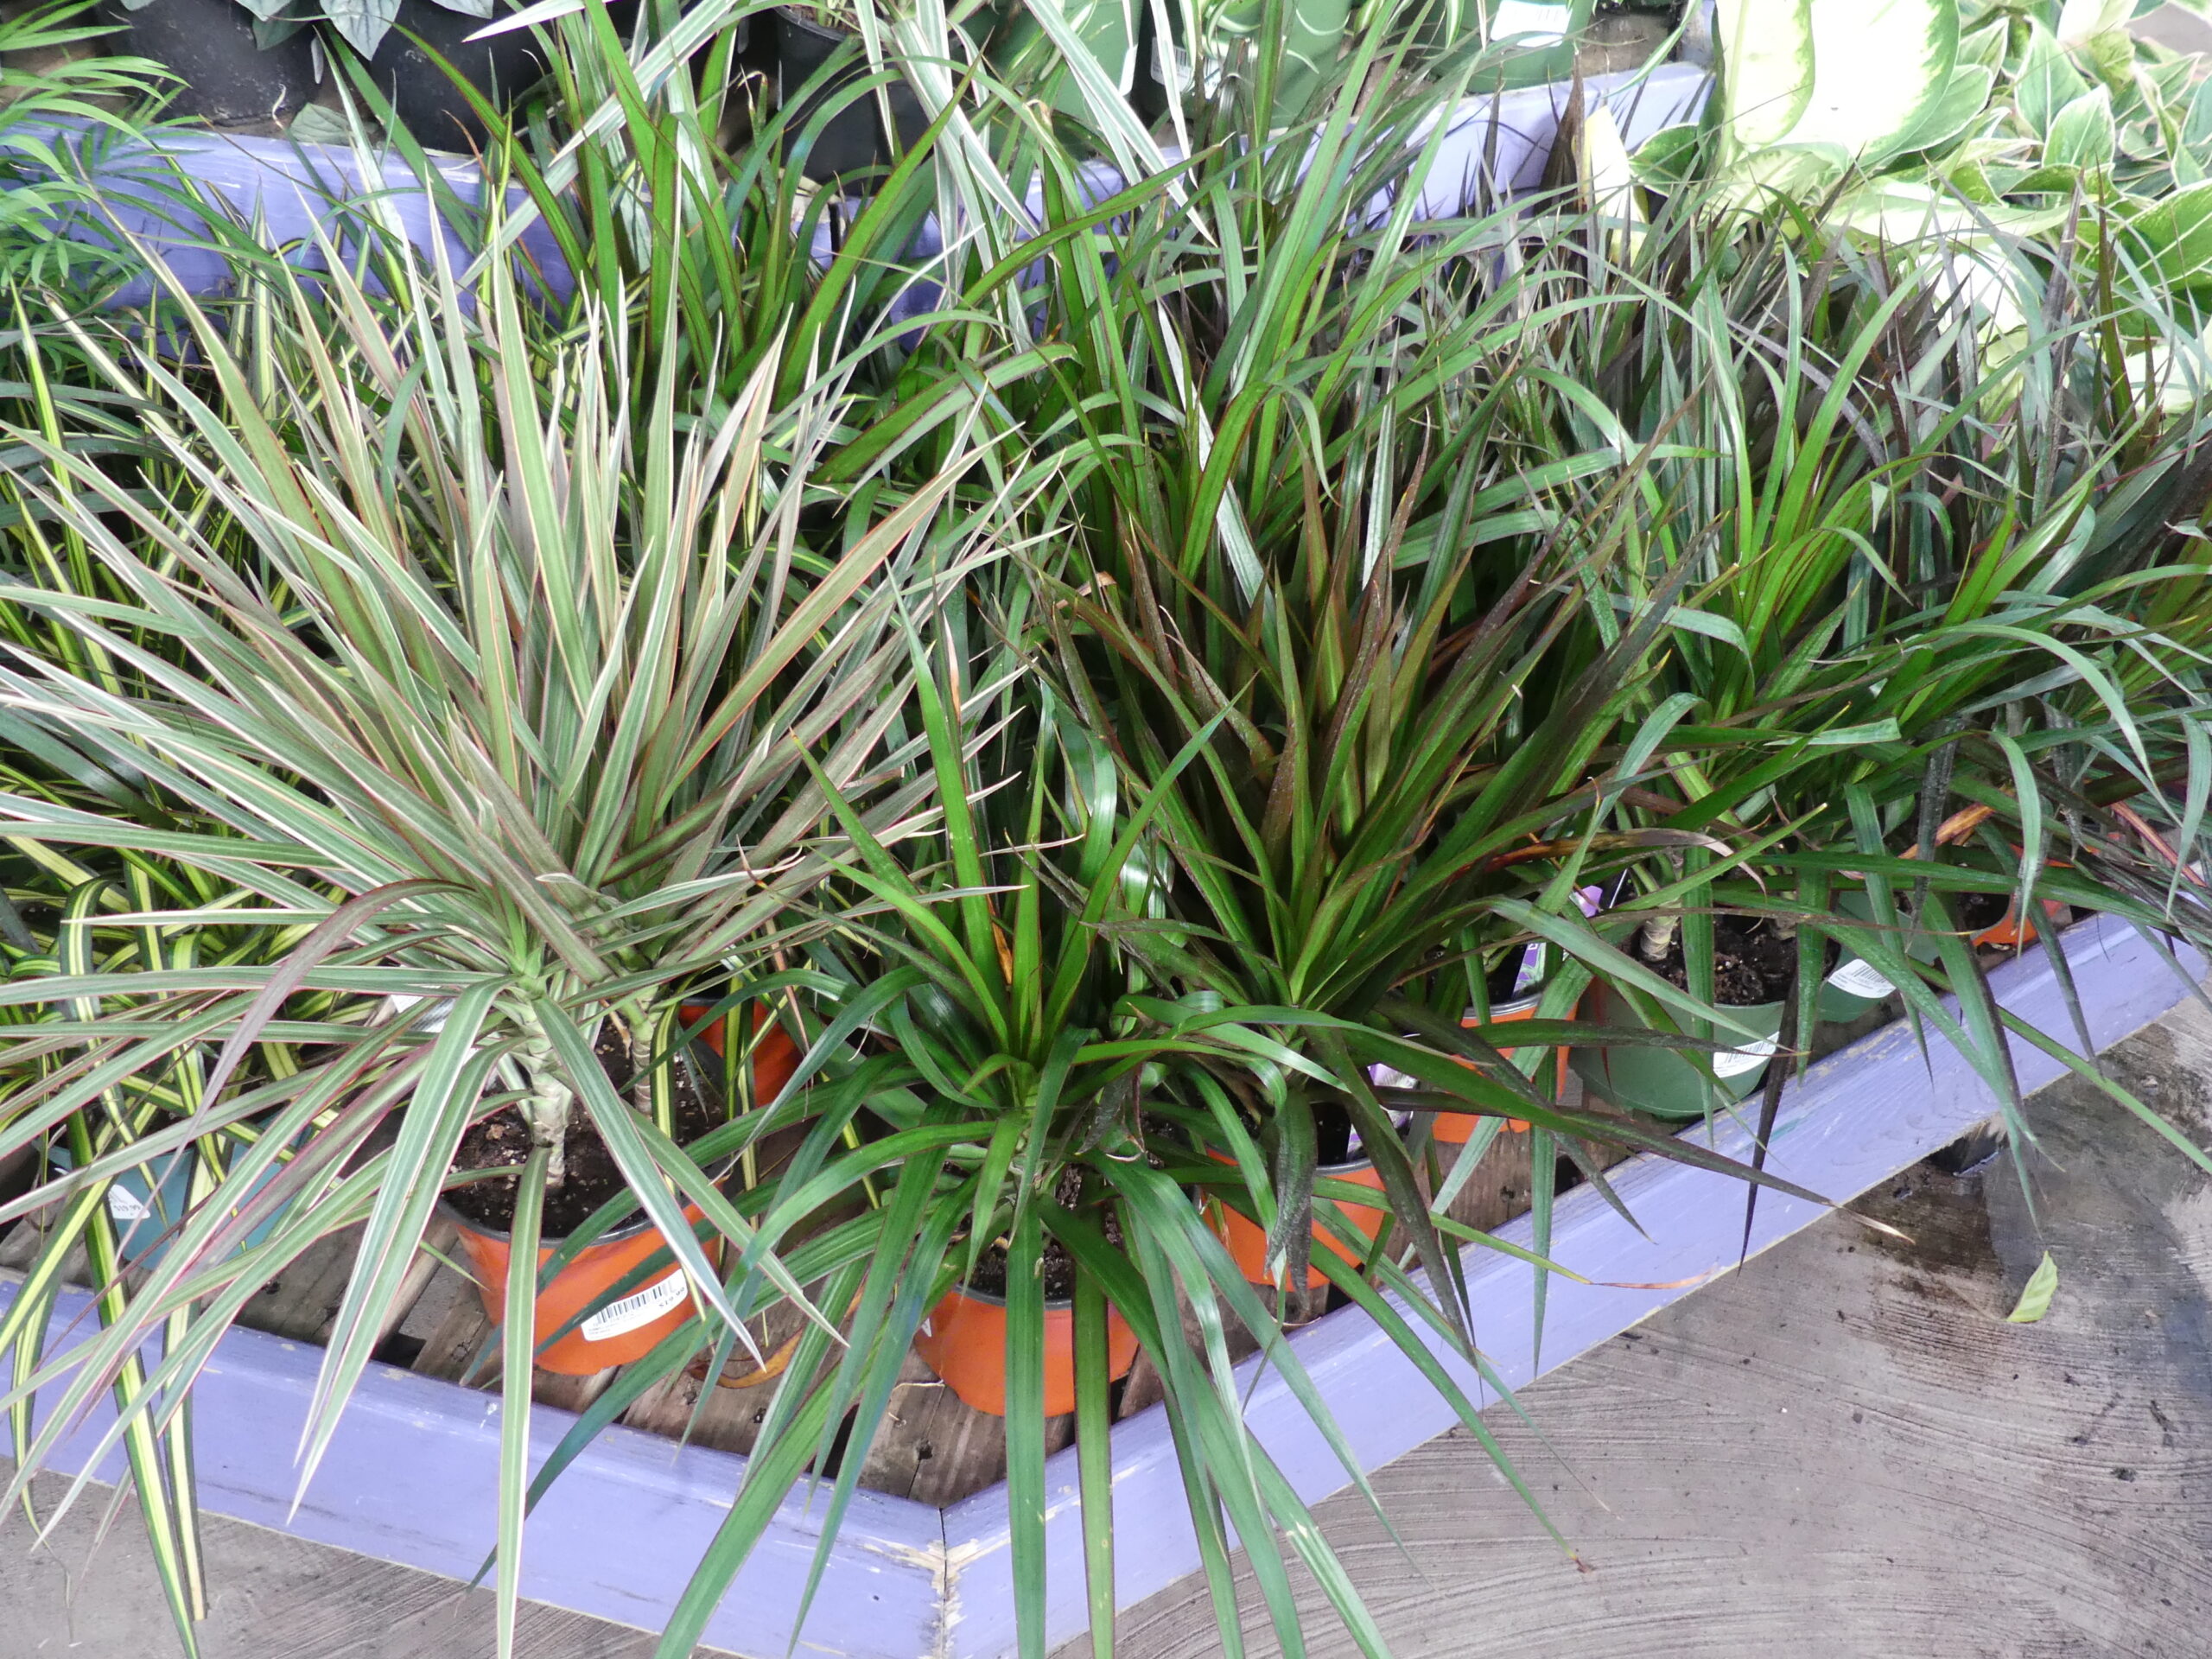 Dracaena marginata in the variegated form (left) and the green species on the right. Sold as single stems and multiple stems in larger pots they tend to drop lower foliage as they get taller. With three canes in one pot the plant can be carefully pruned to make it appear as one lush and dense plant.  Tips cut in early summer are easily rooted in moist sand with 3 inches of cane stripped of leaves in the sand. Canes can also be placed horizontally on moist sand or peat moss and each leaf note (cane section) can sprout a new plant. ANDREW MESSINGER